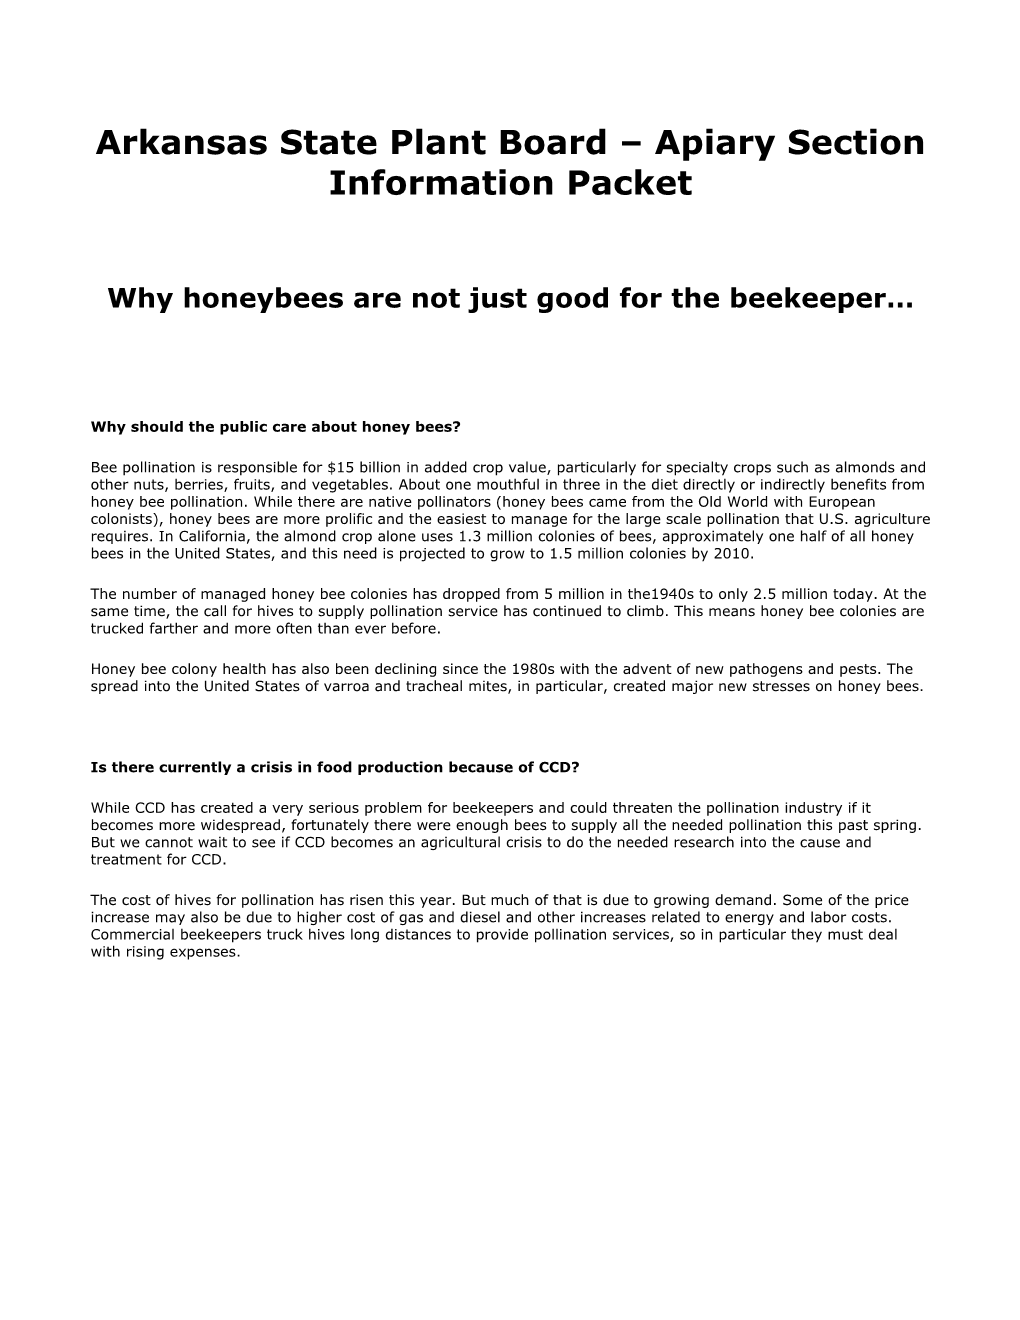 Arkansas State Plant Board – Apiary Section Information Packet